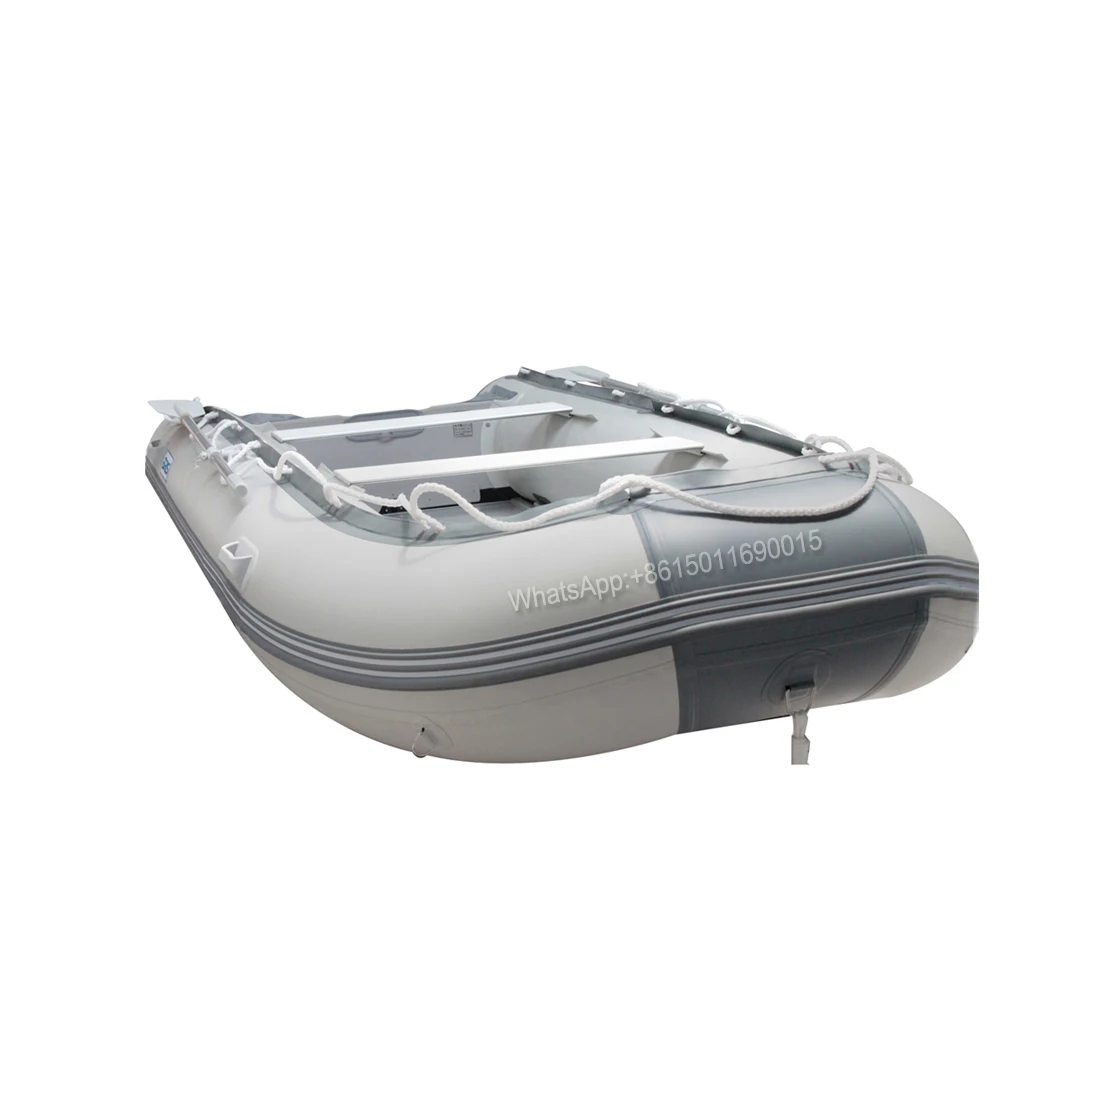 Assault Boat Inflatable Rubber Boat Thickened 3.8 Meters 5/6